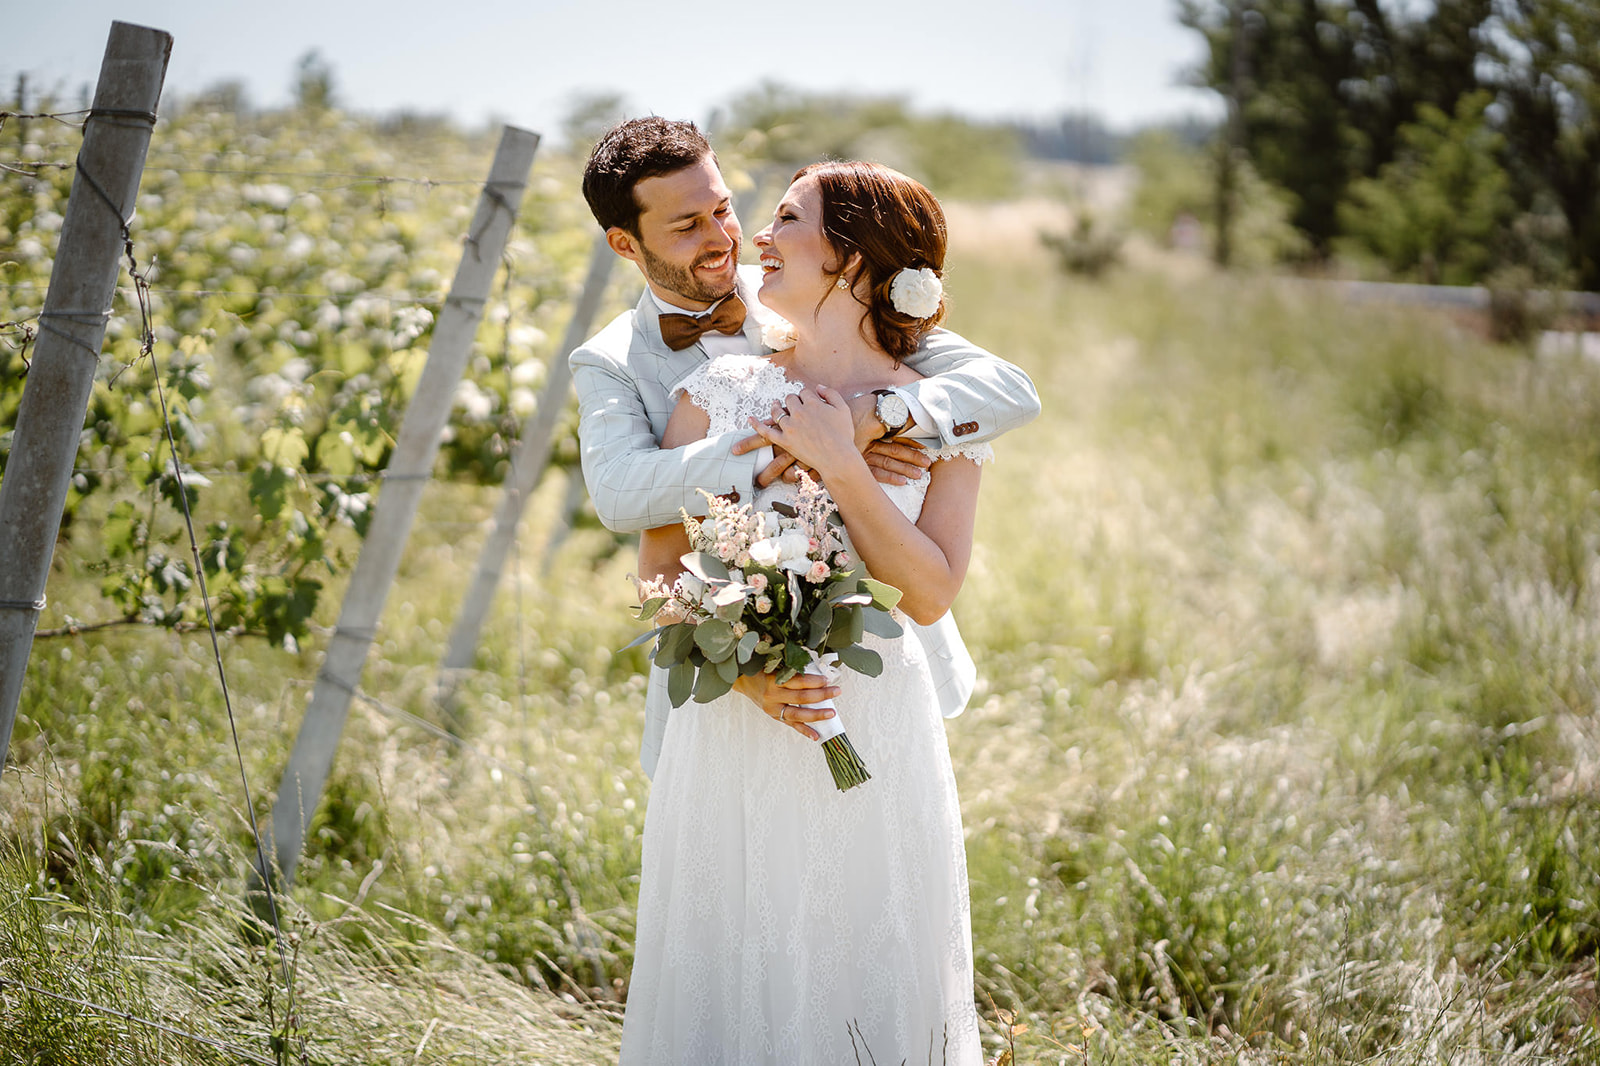 Couple photo in the vineyard of bride and groom